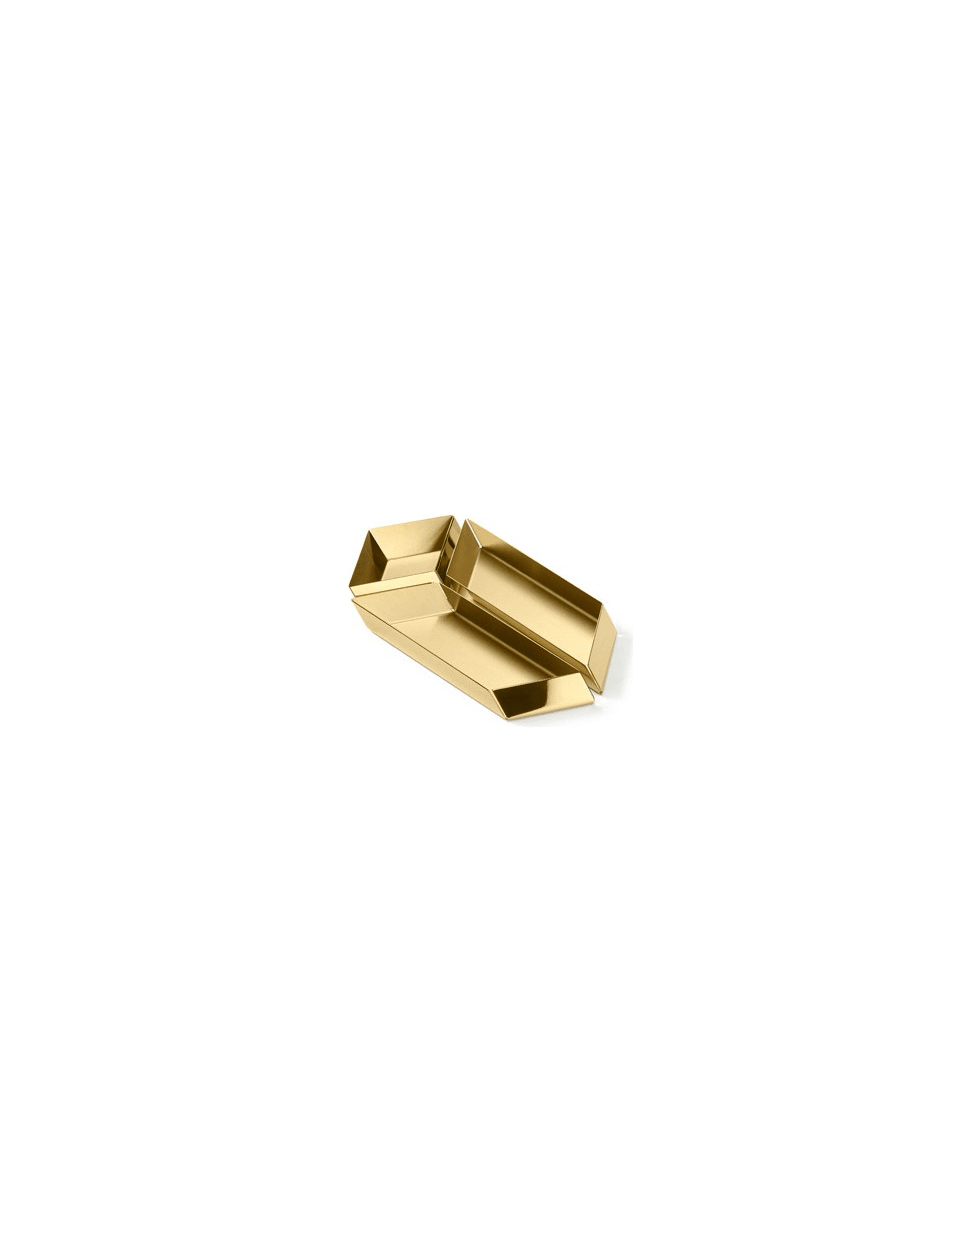 Ghidini 1961 Axonometry - Small Paralelepiped Polished Brass - Polished brass